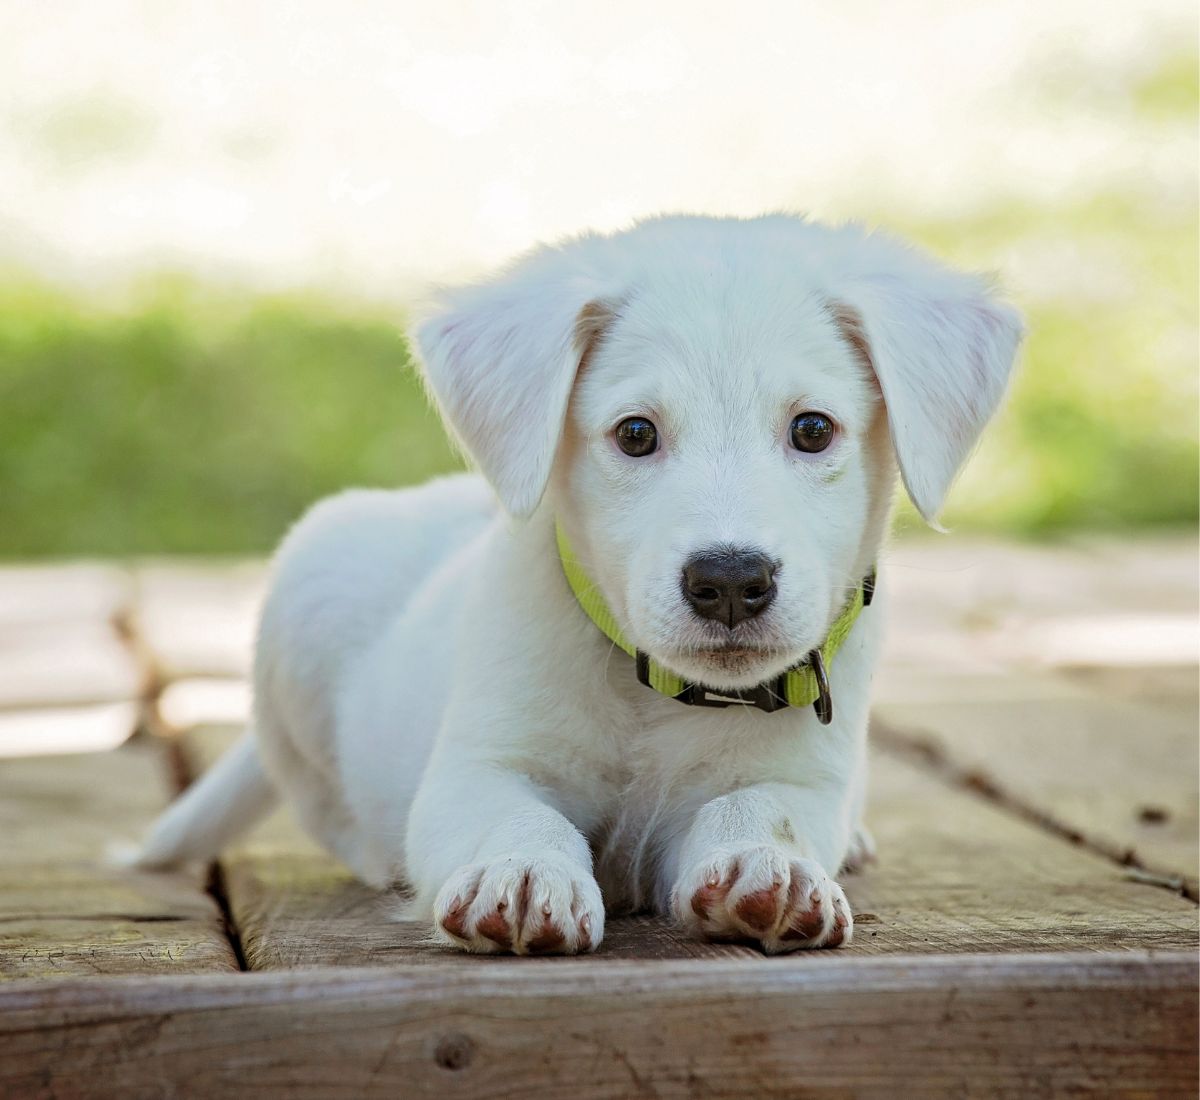 a white puppy lying on a wood surface